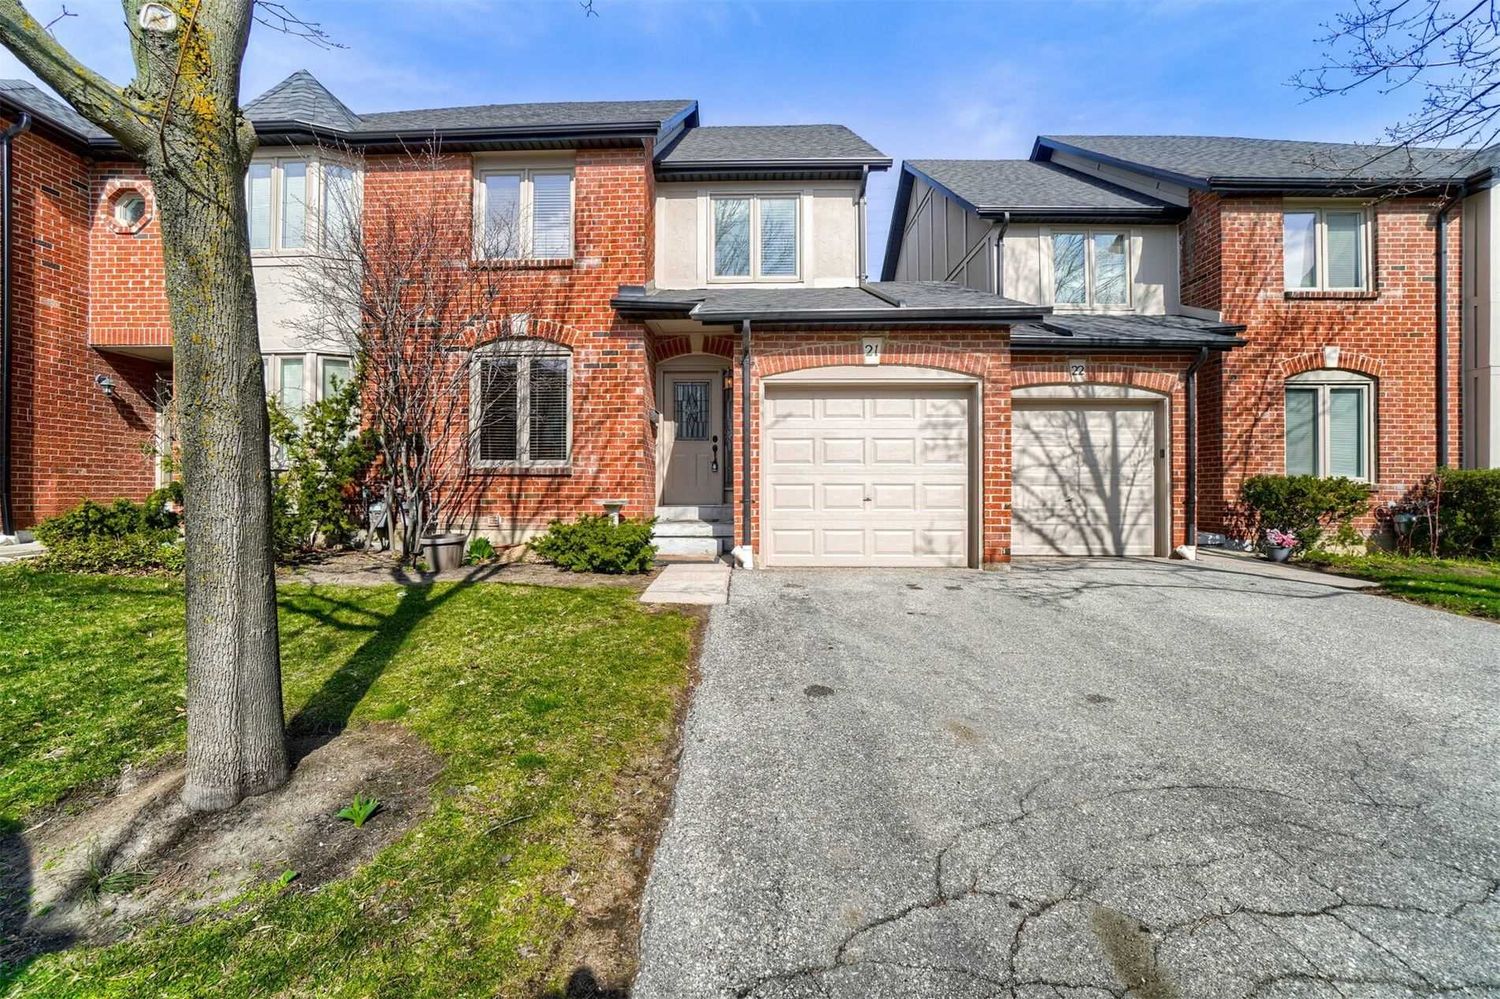 4635 Regents Terrace. 4635 Regents Terrace Townhomes is located in  Mississauga, Toronto - image #1 of 2